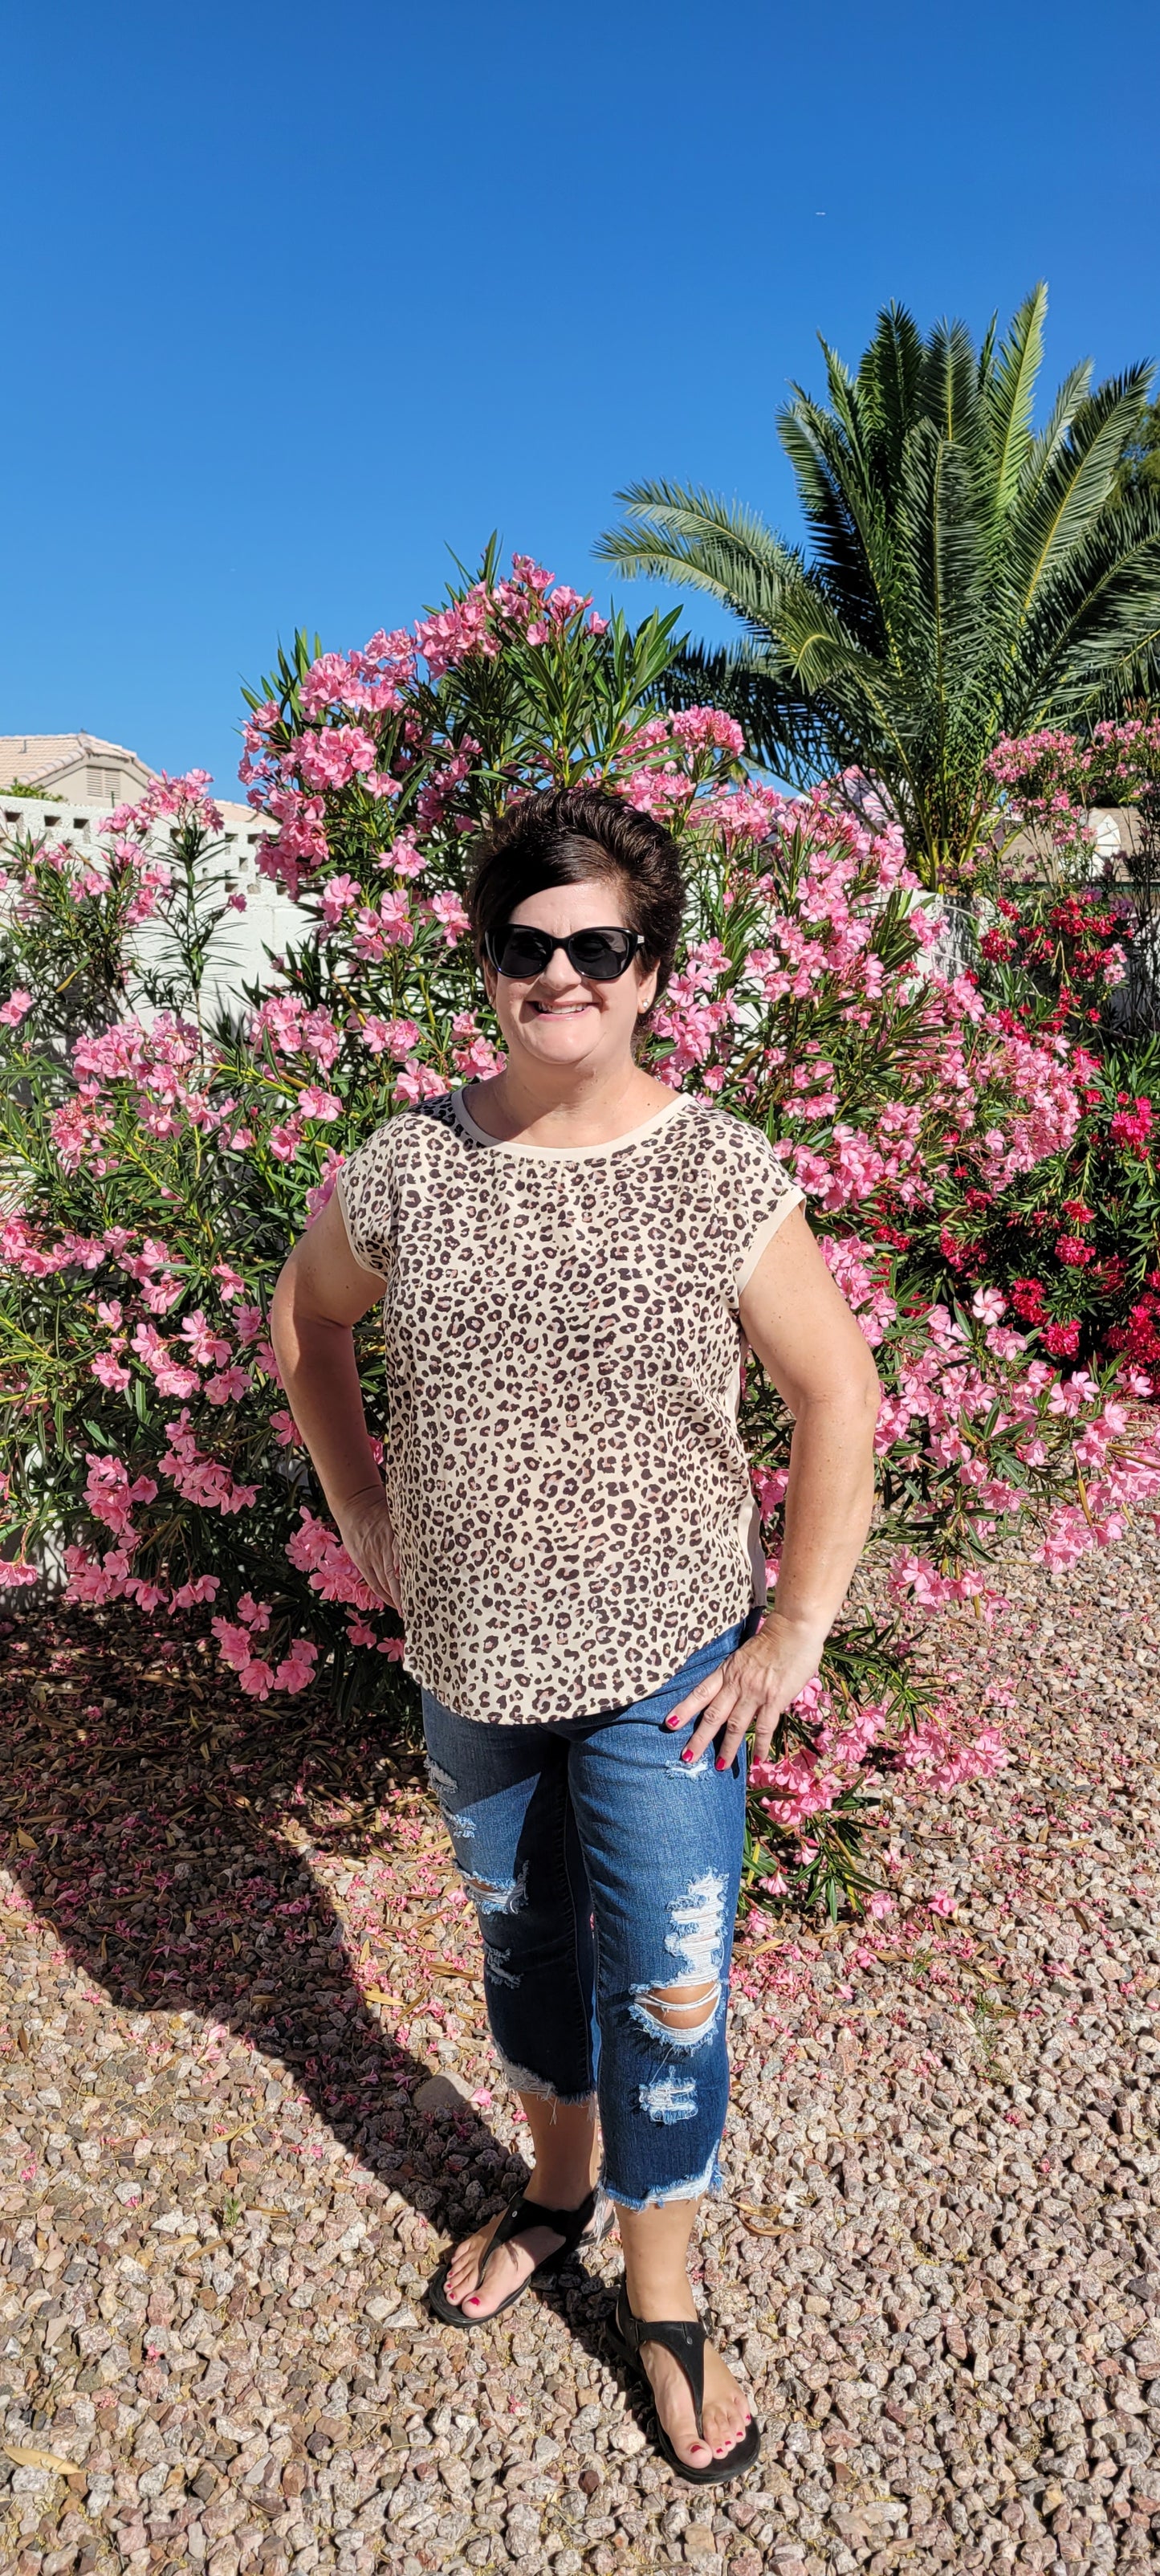 “Road Less Traveled” is a sleeveless top, with leopard print front (beige, brown, camel, agreeable gray) and contrast back, boat neckline, trimmed with beige soft modal, and rounded hemline. This is a satiny, silky soft high-low top. This is definitely a business or casual top. Sizes small through large.